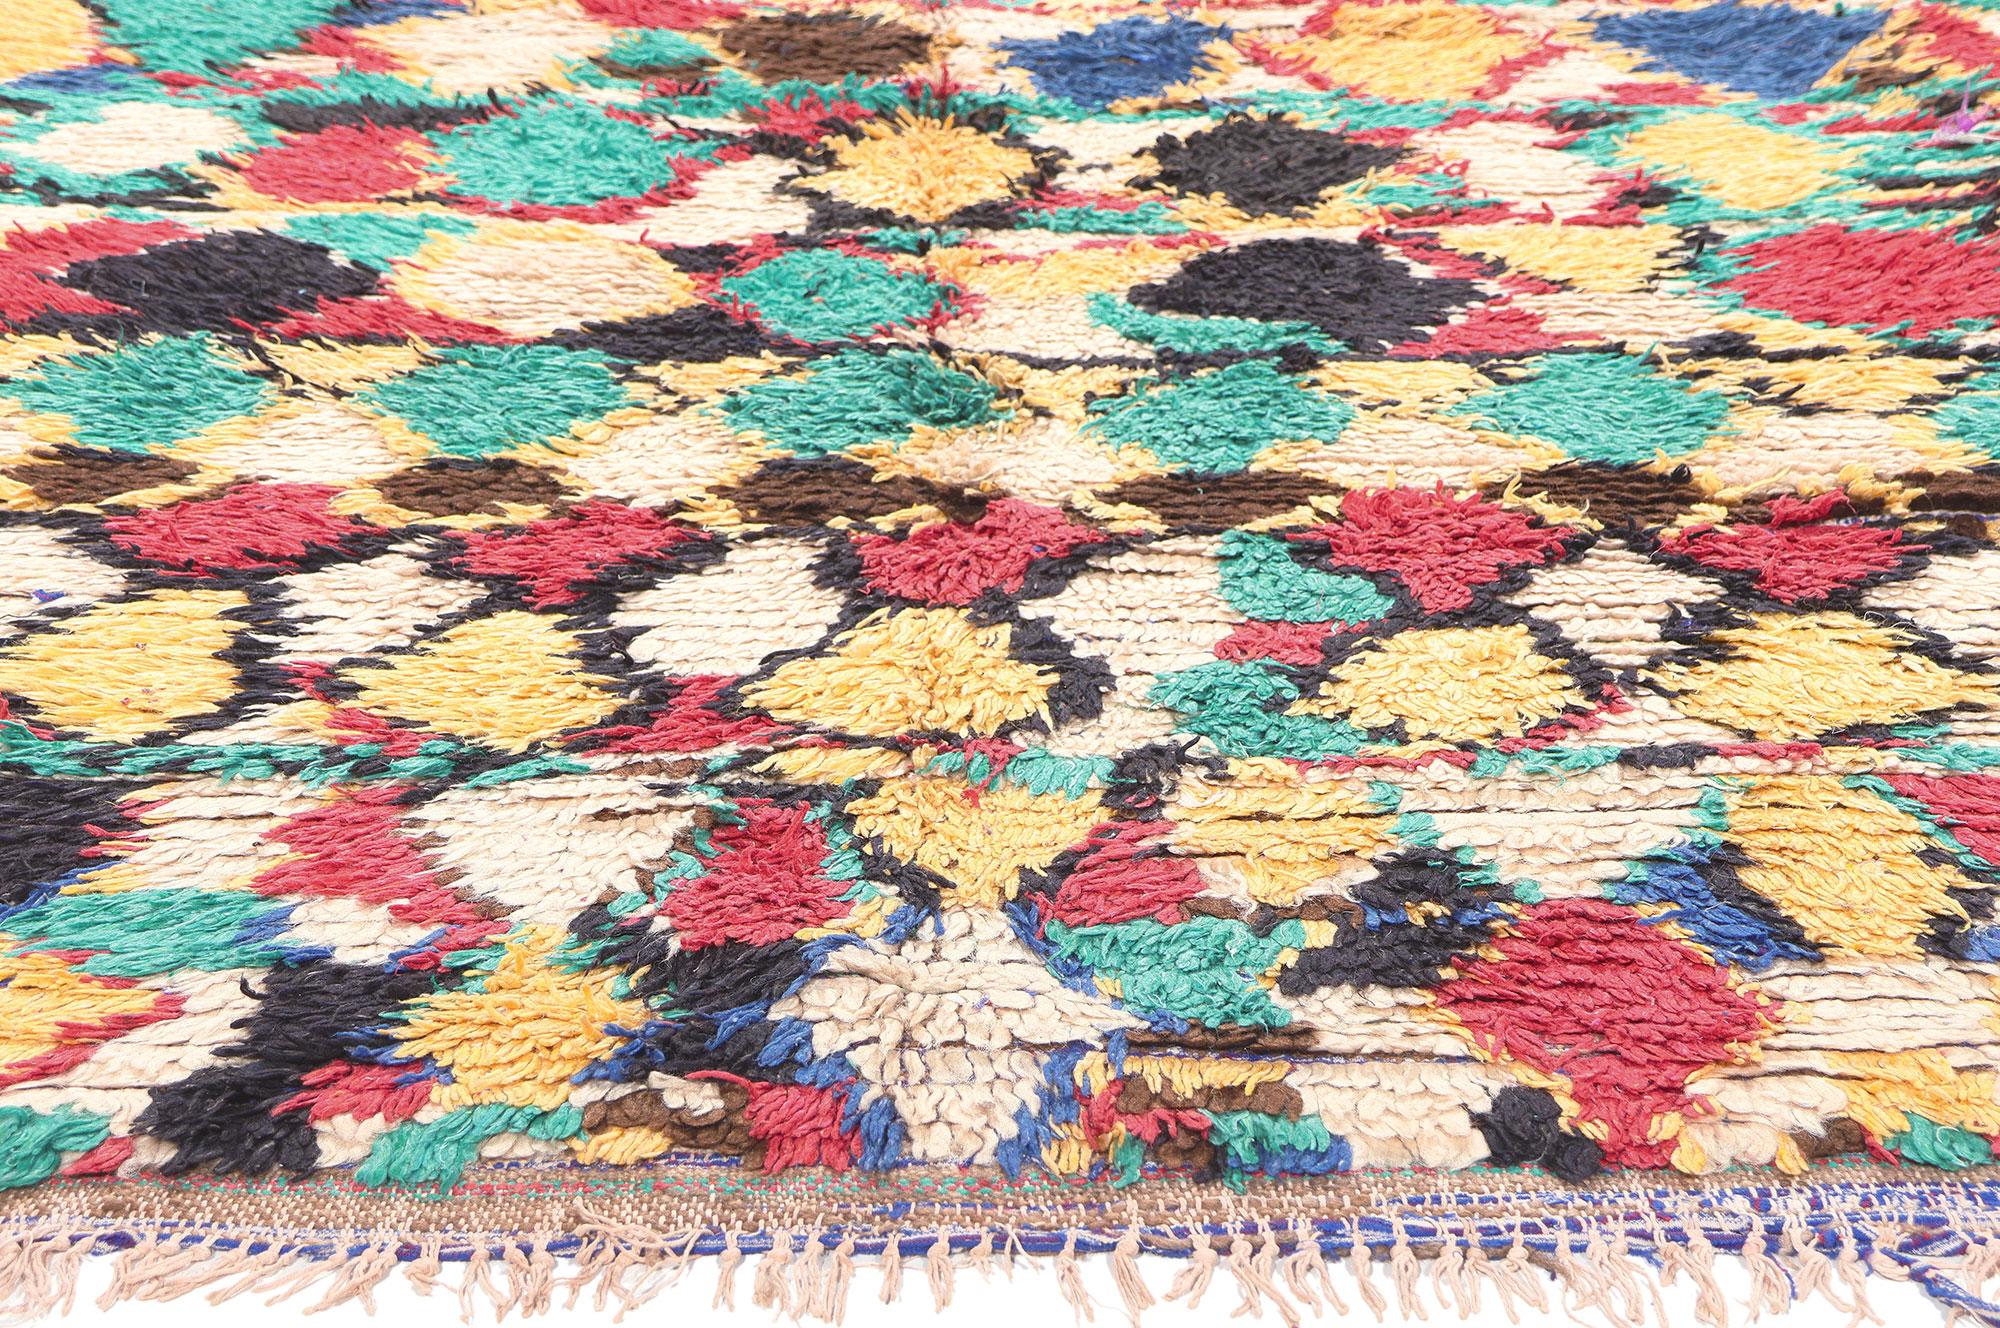 Vintage Moroccan Azilal Rag Rug, Maximalist Boho Meets Tribal Enchantment In Good Condition For Sale In Dallas, TX